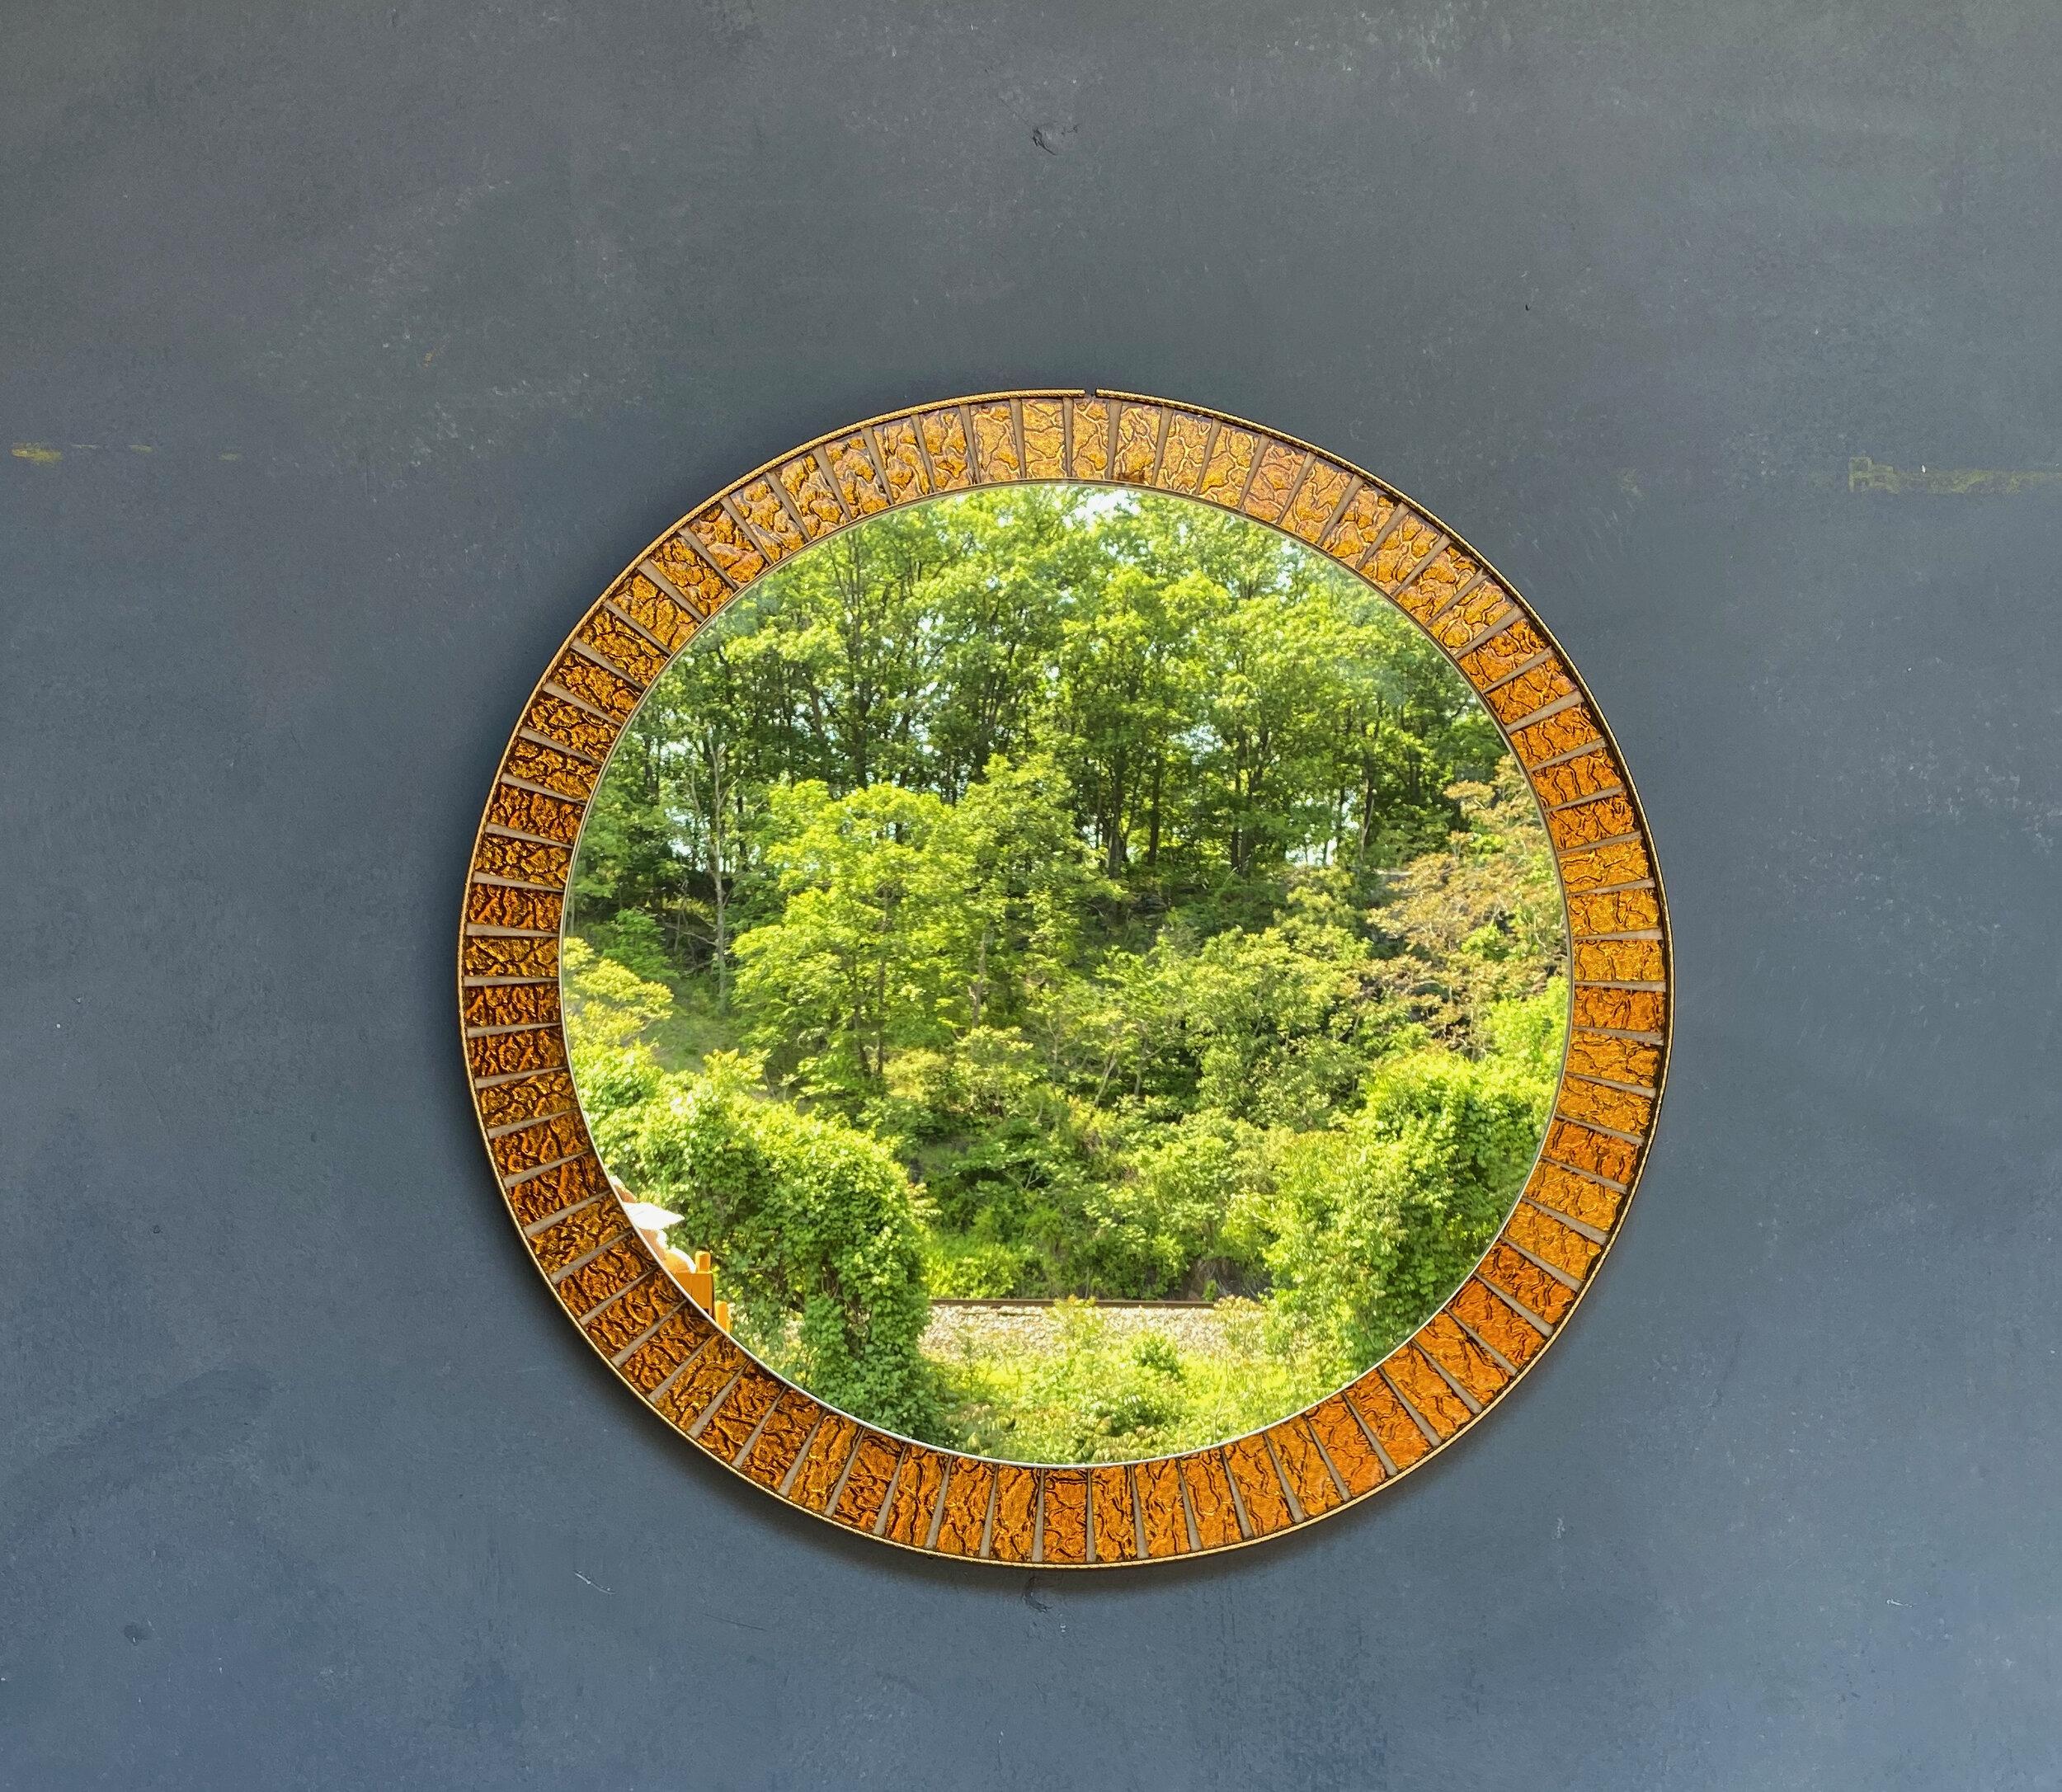 This round Spanish 1960s mirror features a brass enclosed frame surrounding alternating gold metallic sections with radiating brass dividers.  In very good vintage condition, and with a diameter of 23 inches, this eye-catching mid century mirror is